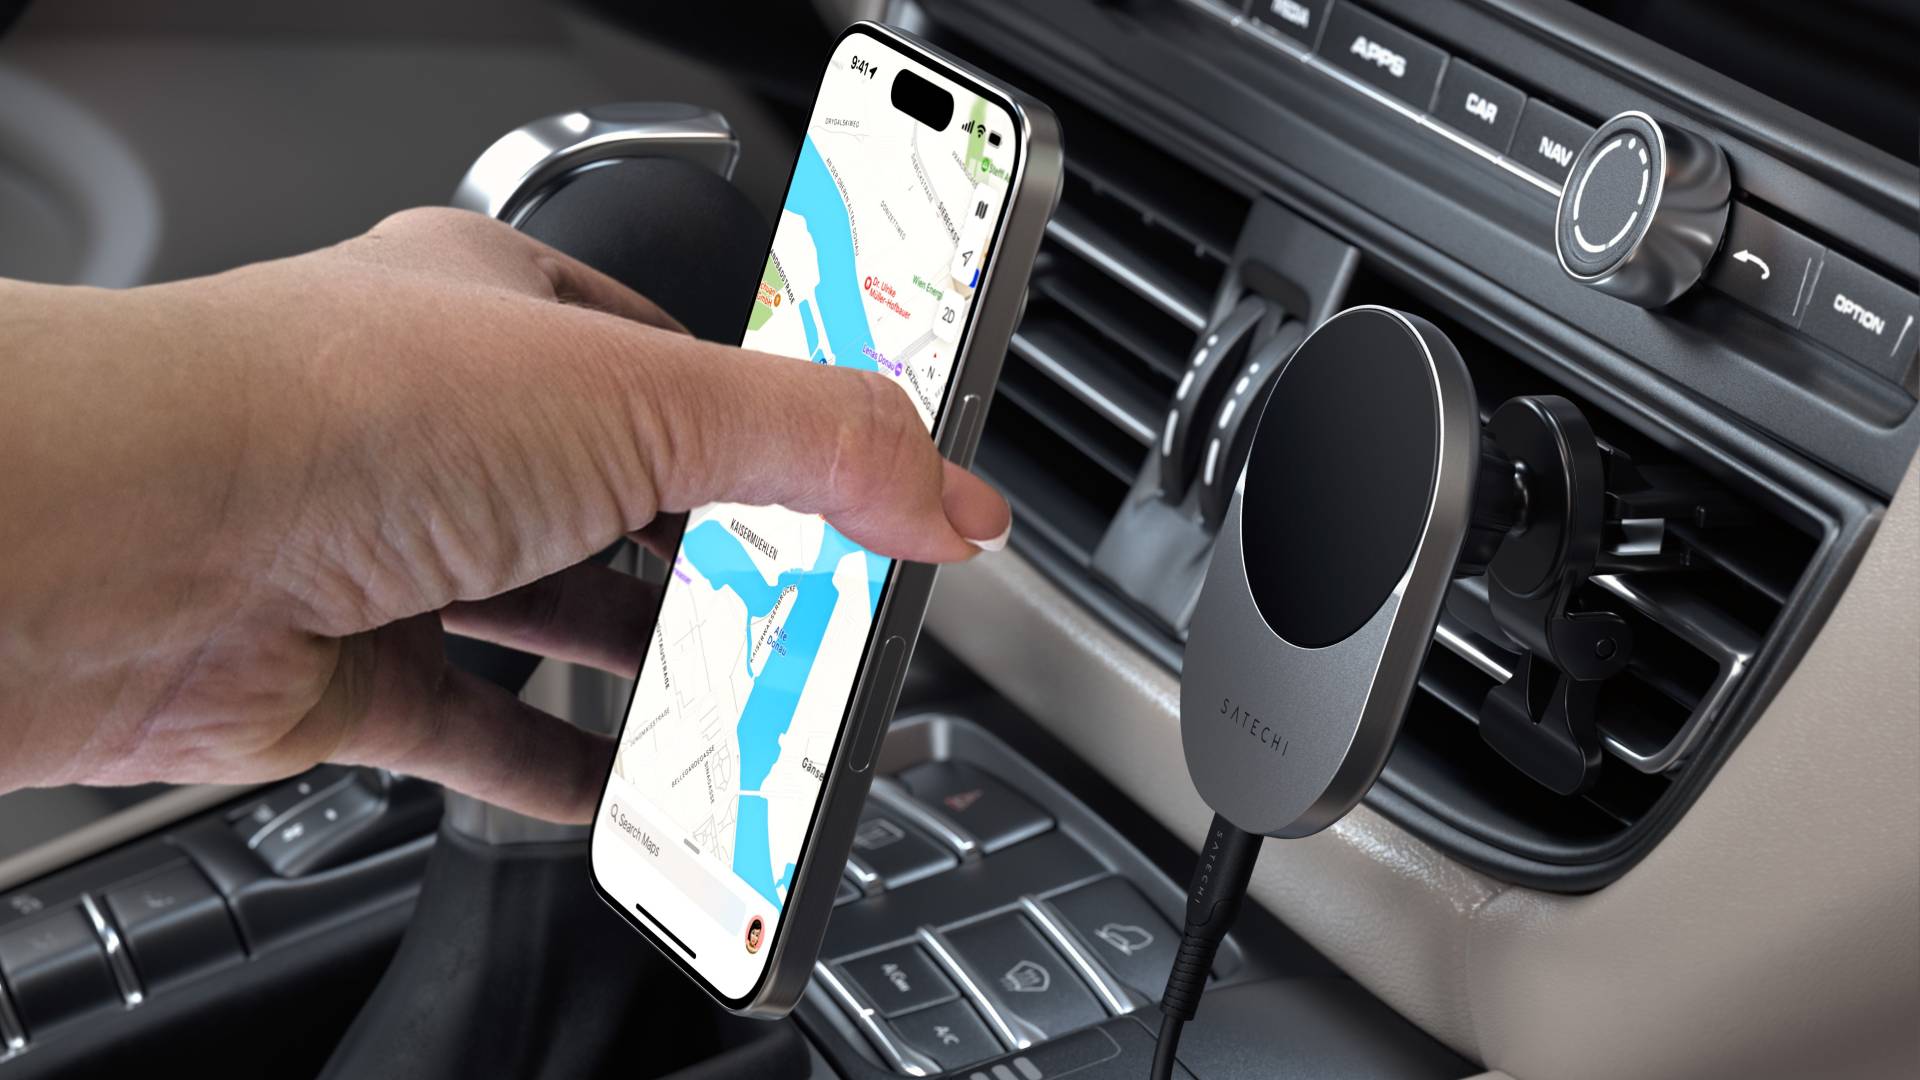 Satechi’s new Qi2 Wireless Car Charger features a sleek design and 15W output